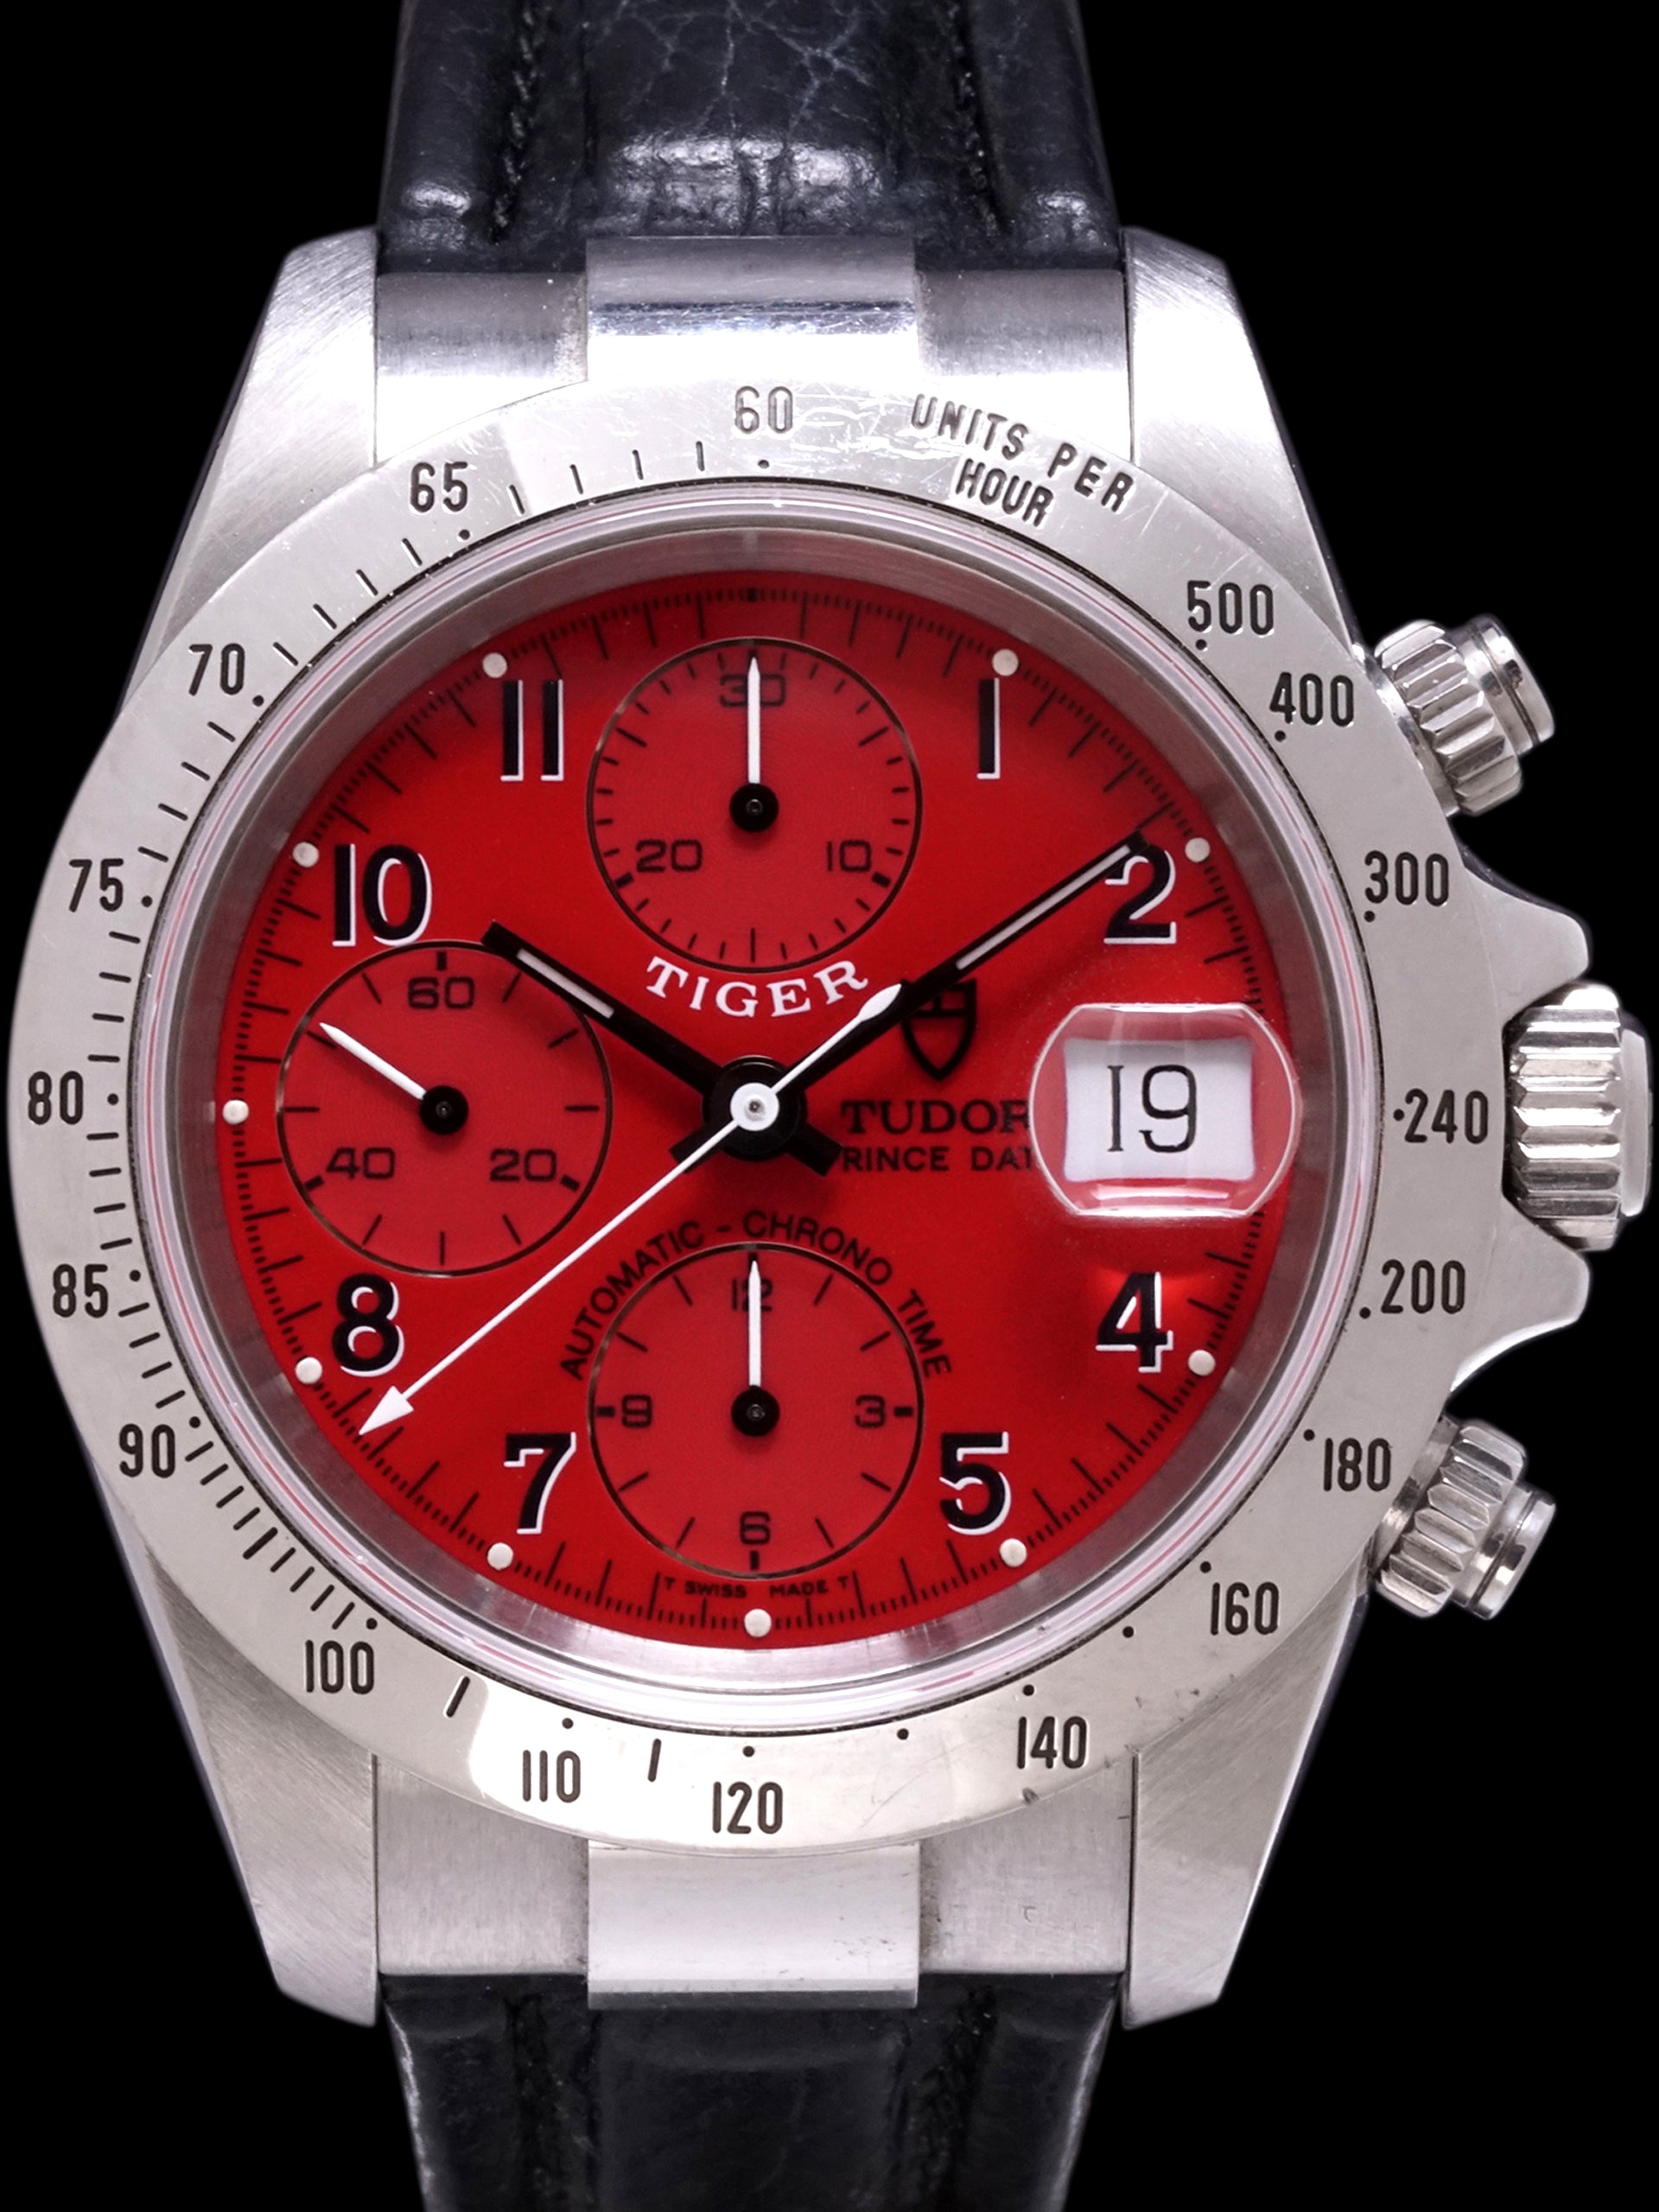 *Unpolished* 1999 Tudor Tiger Chronograph (Ref. 79280) "Red Dial" W/ Box & Papers